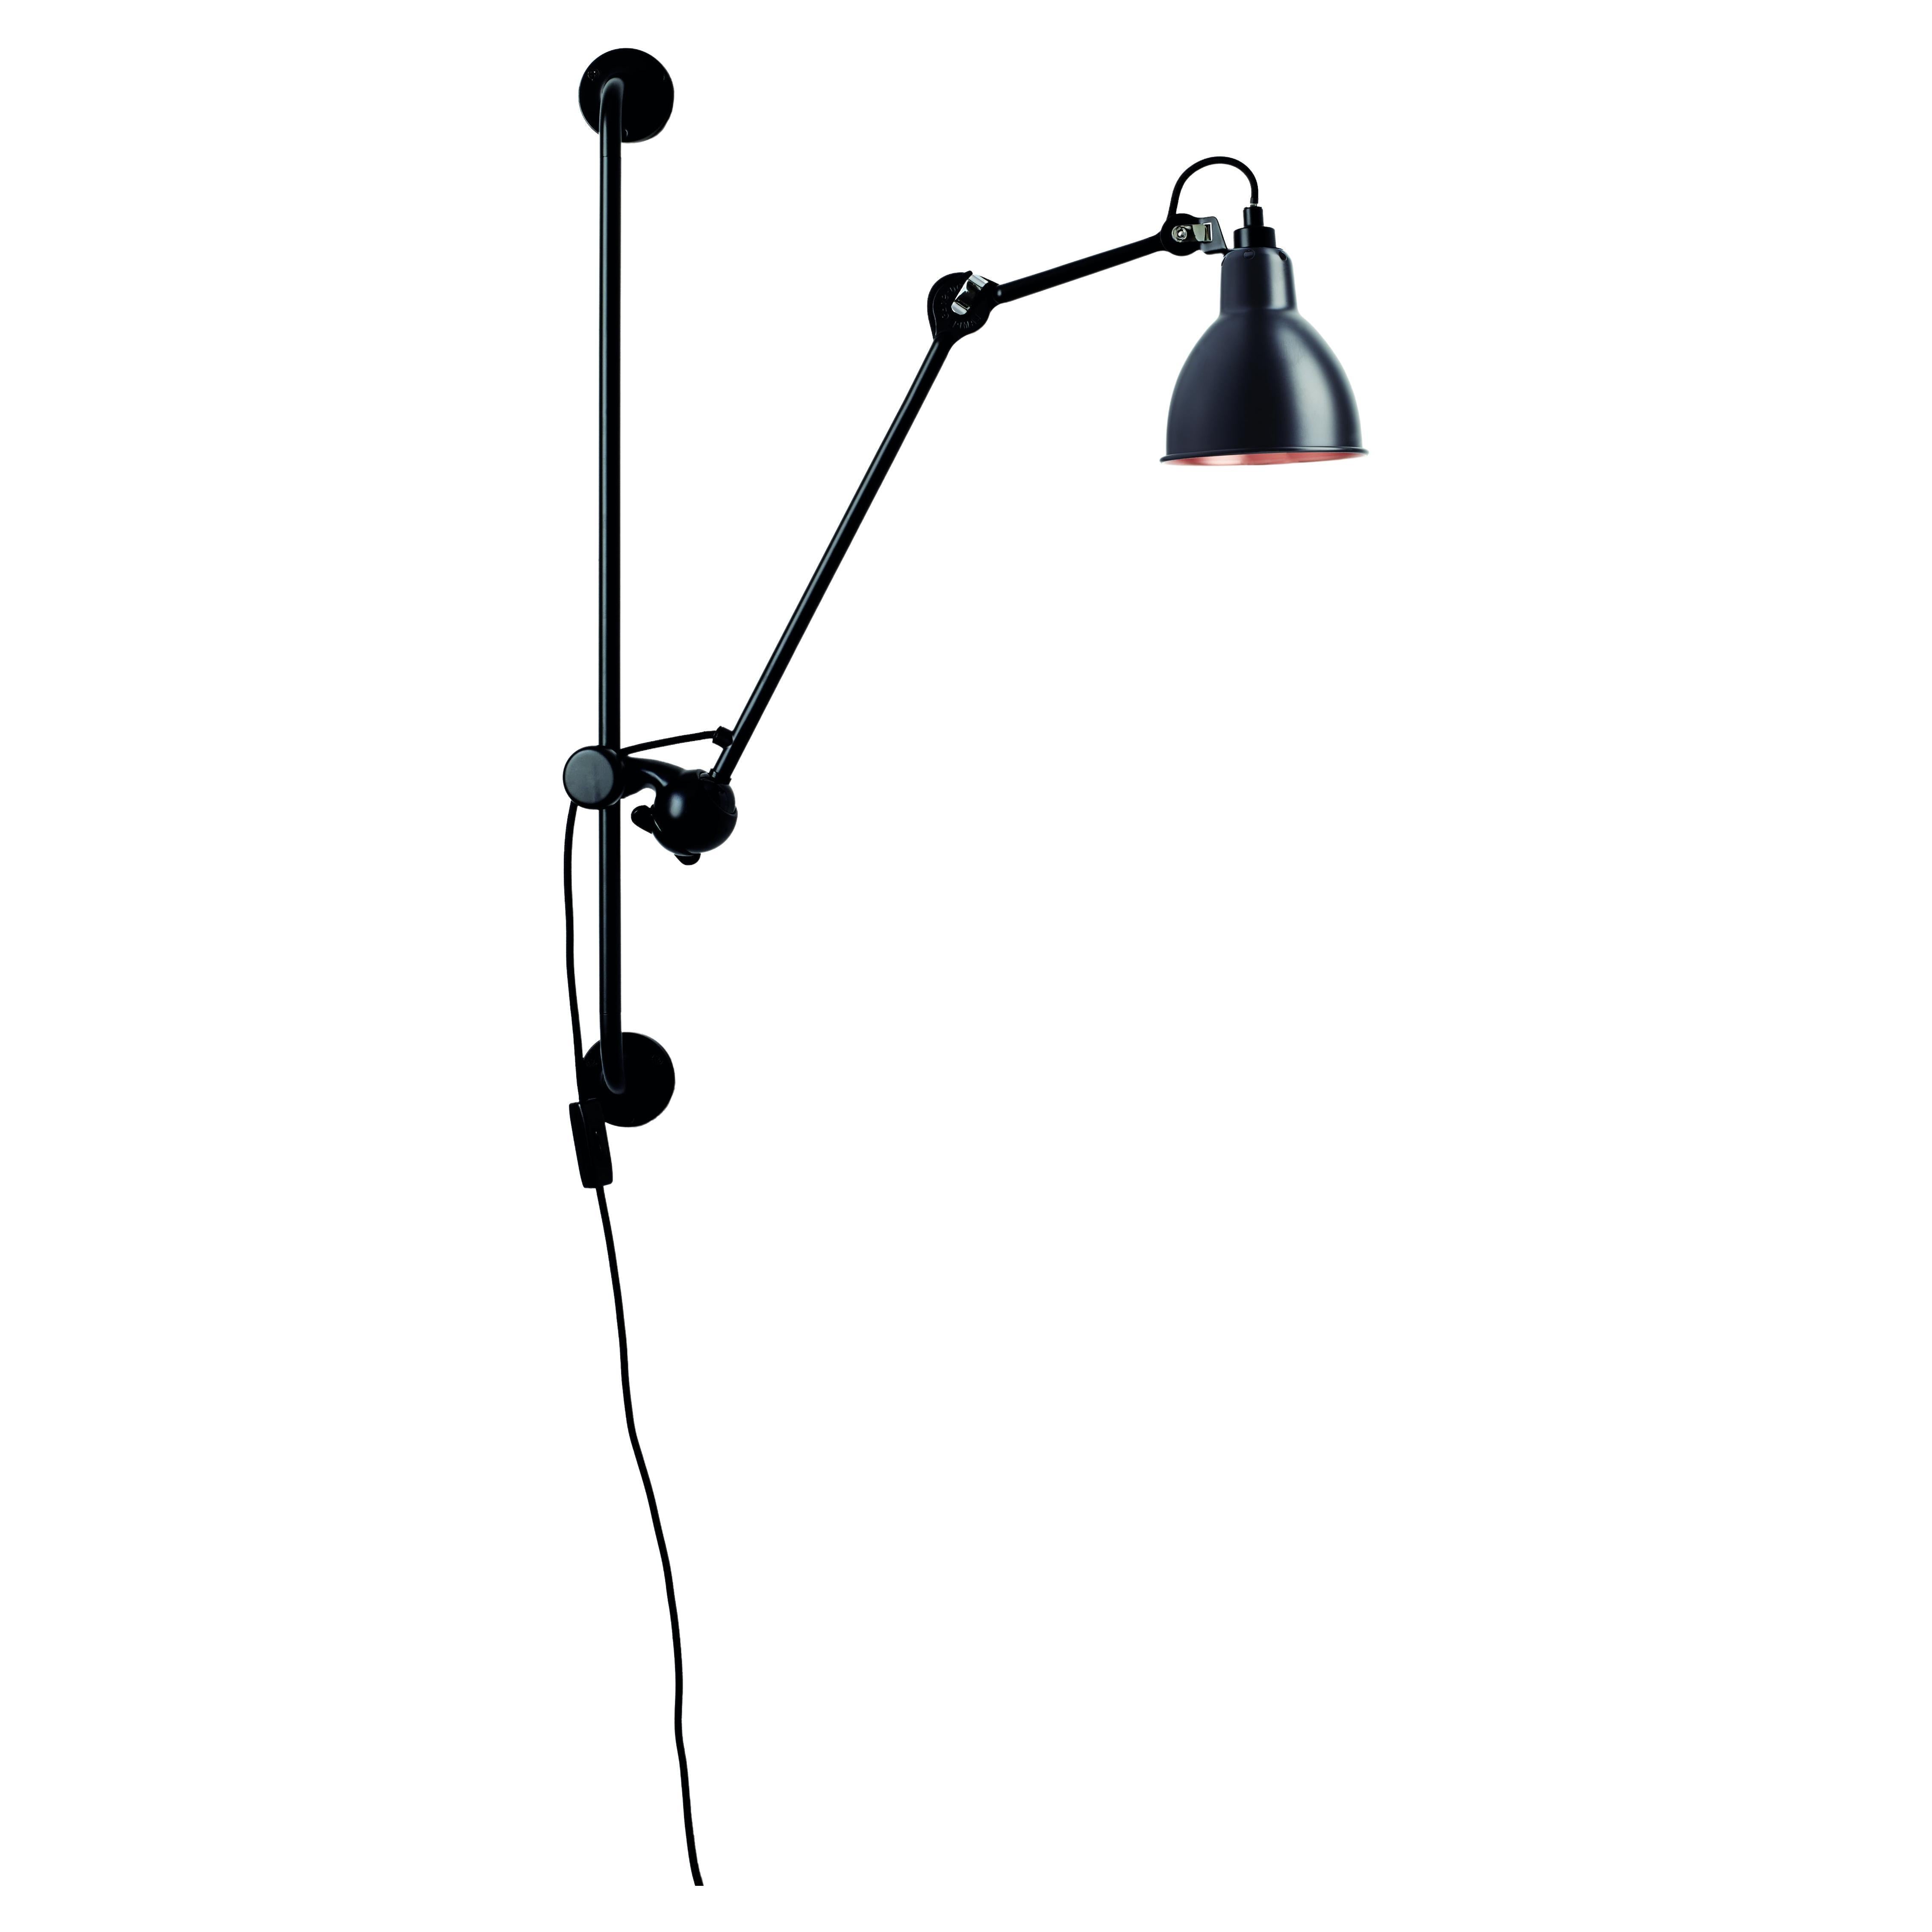 DCW Editions La Lampe Gras N°210 Wall Lamp in Black Arm and Black Copper Shade